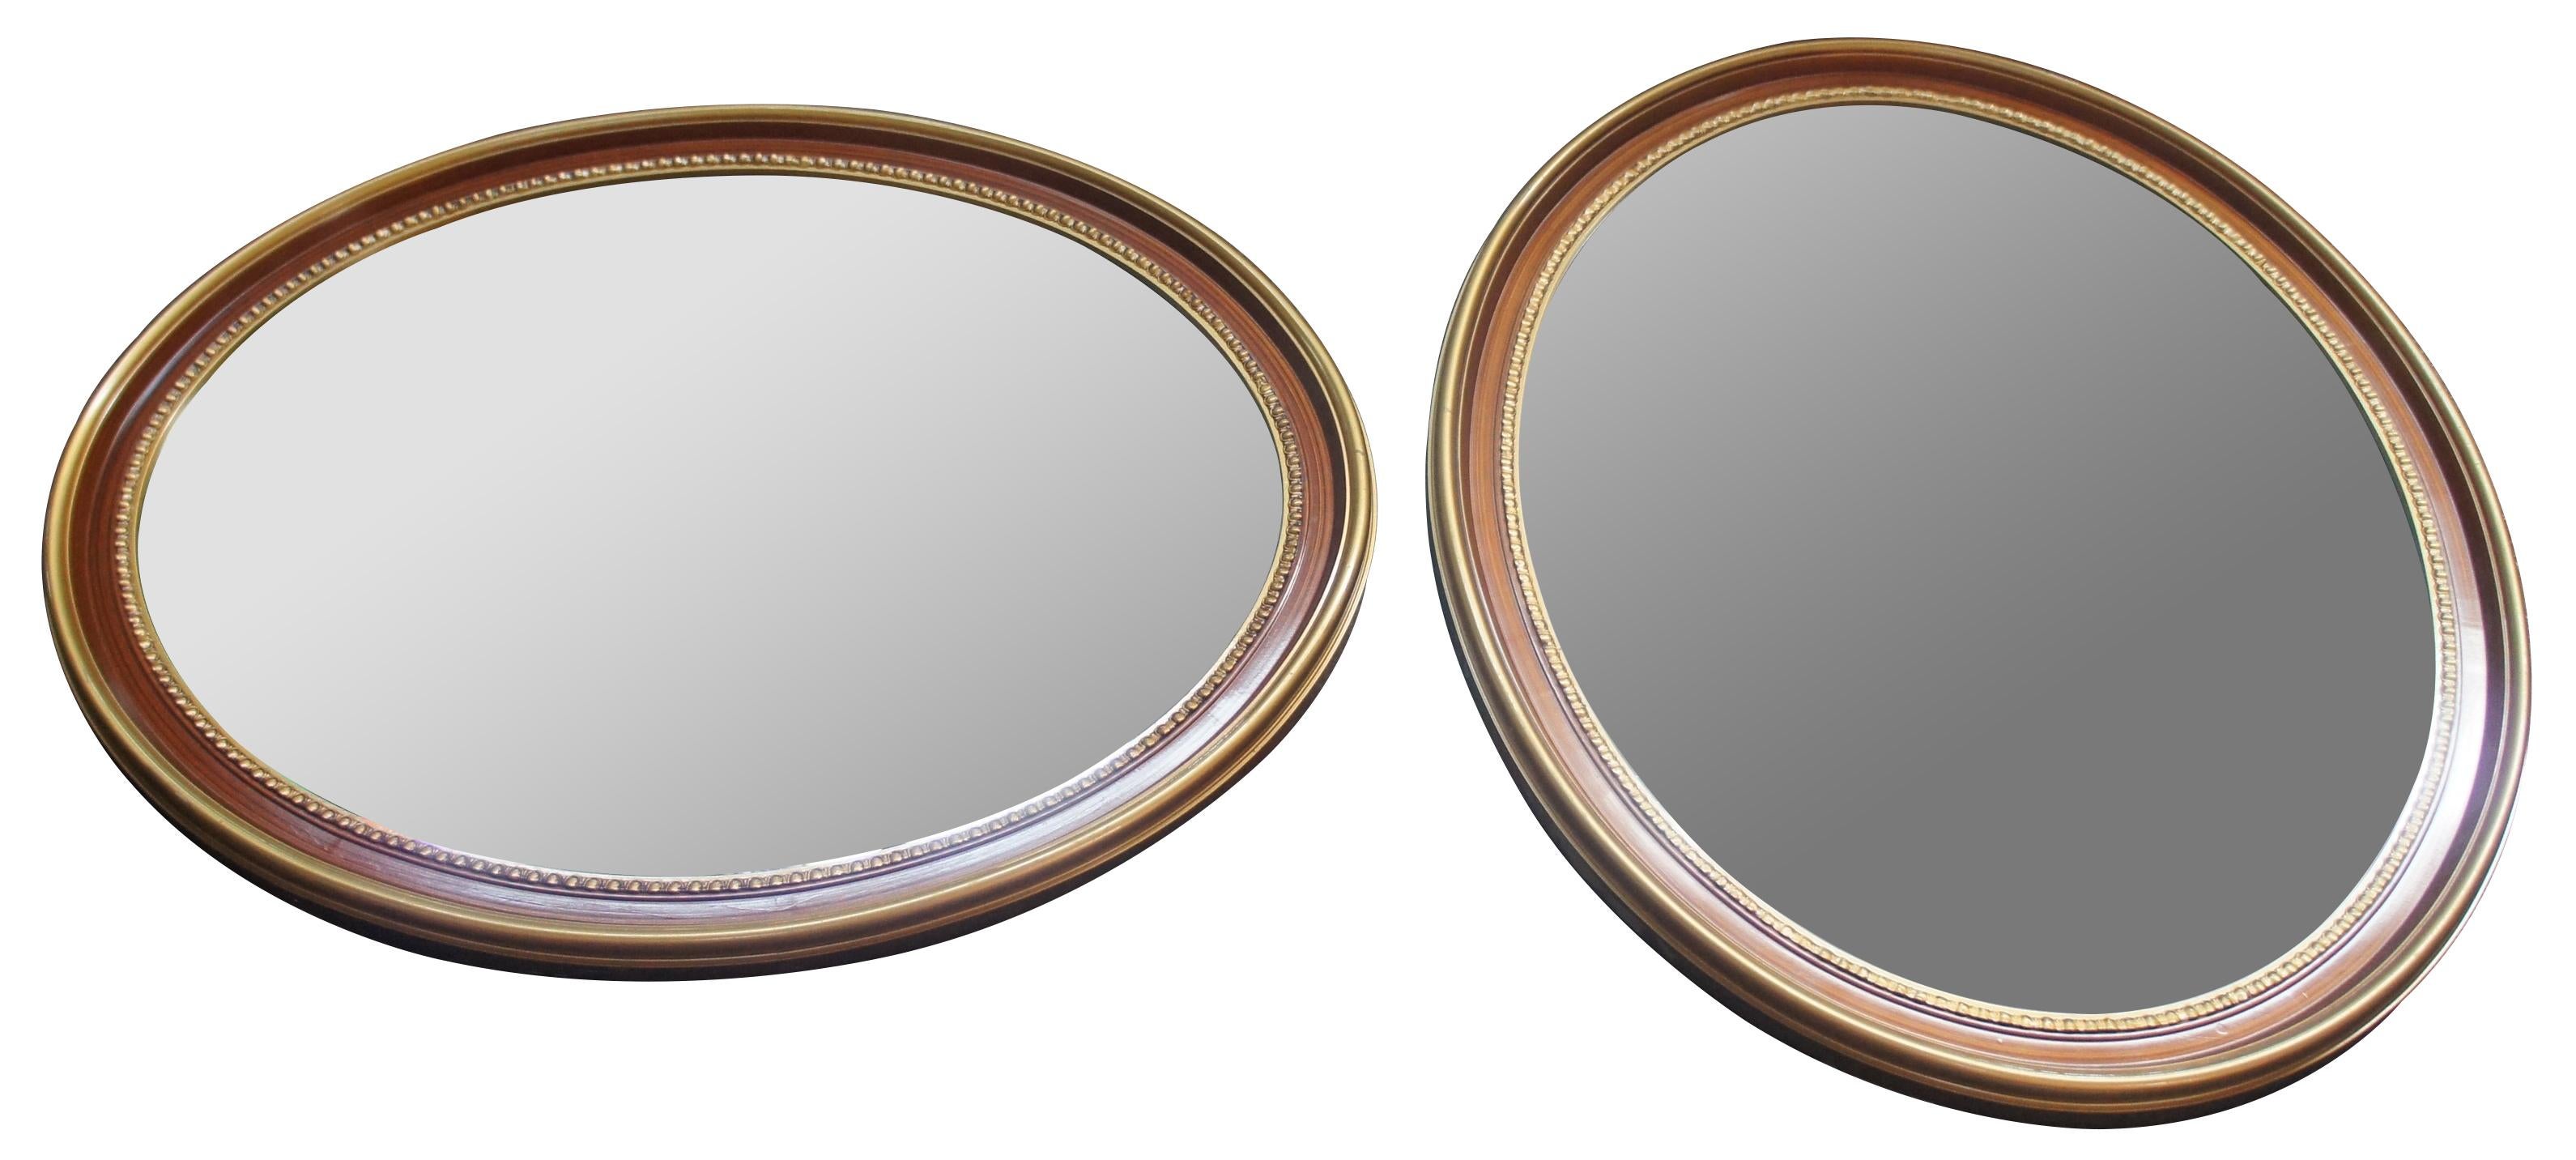 2 vintage oval wall or vanity mirrors featuring a painted grain with gold gilded and beaded accents.